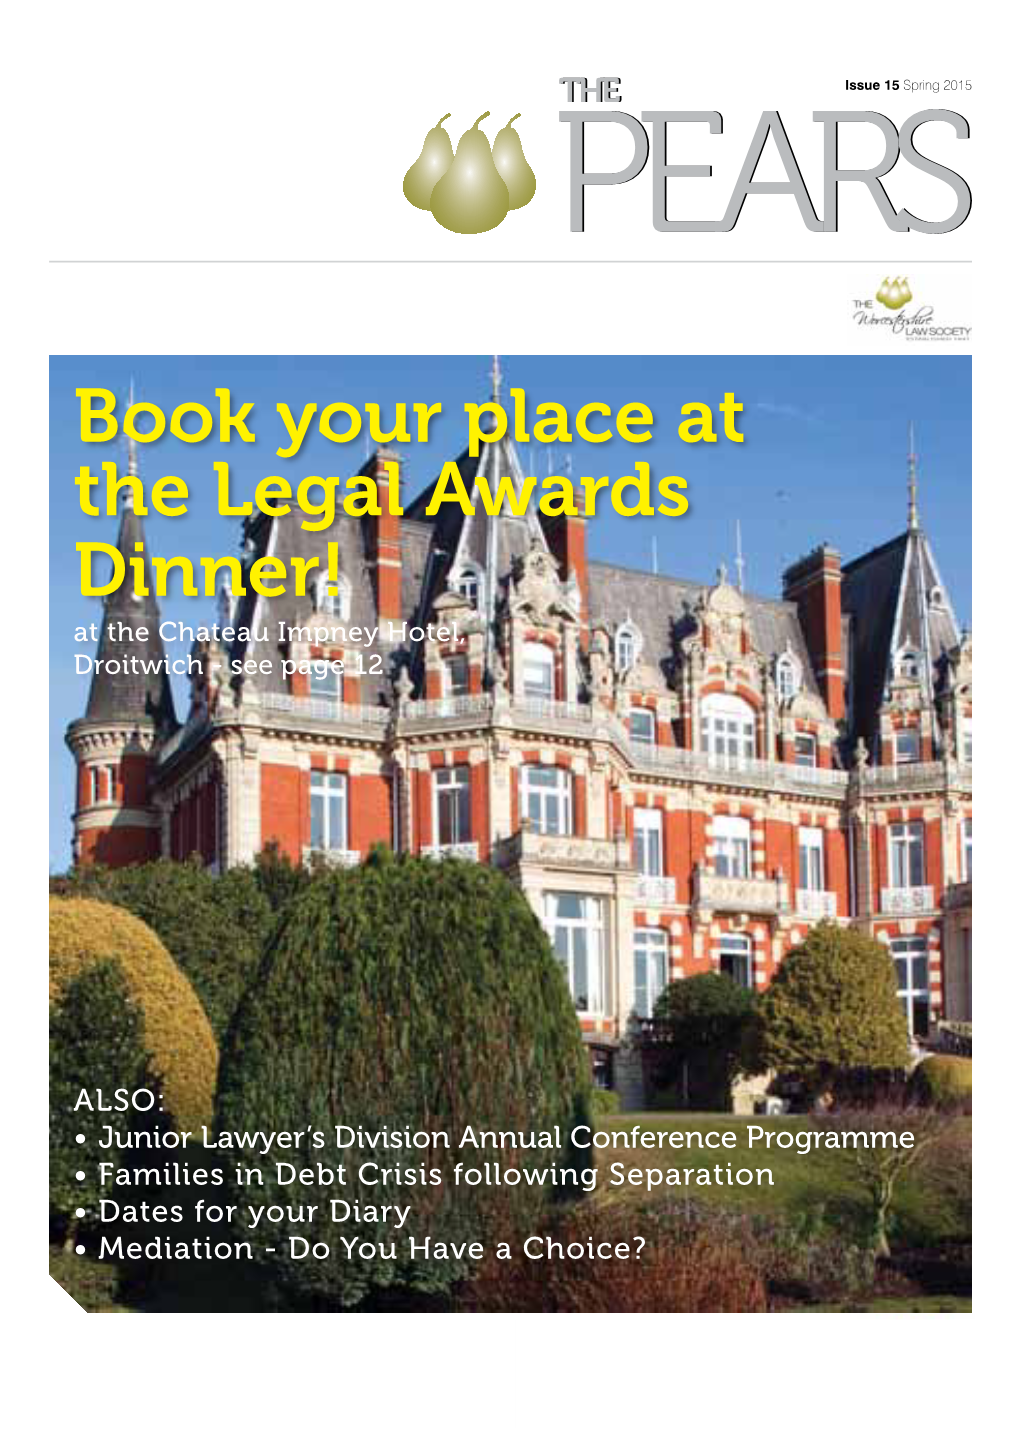 Book Your Place at the Legal Awards Dinner! at the Chateau Impney Hotel, Droitwich - See Page 12